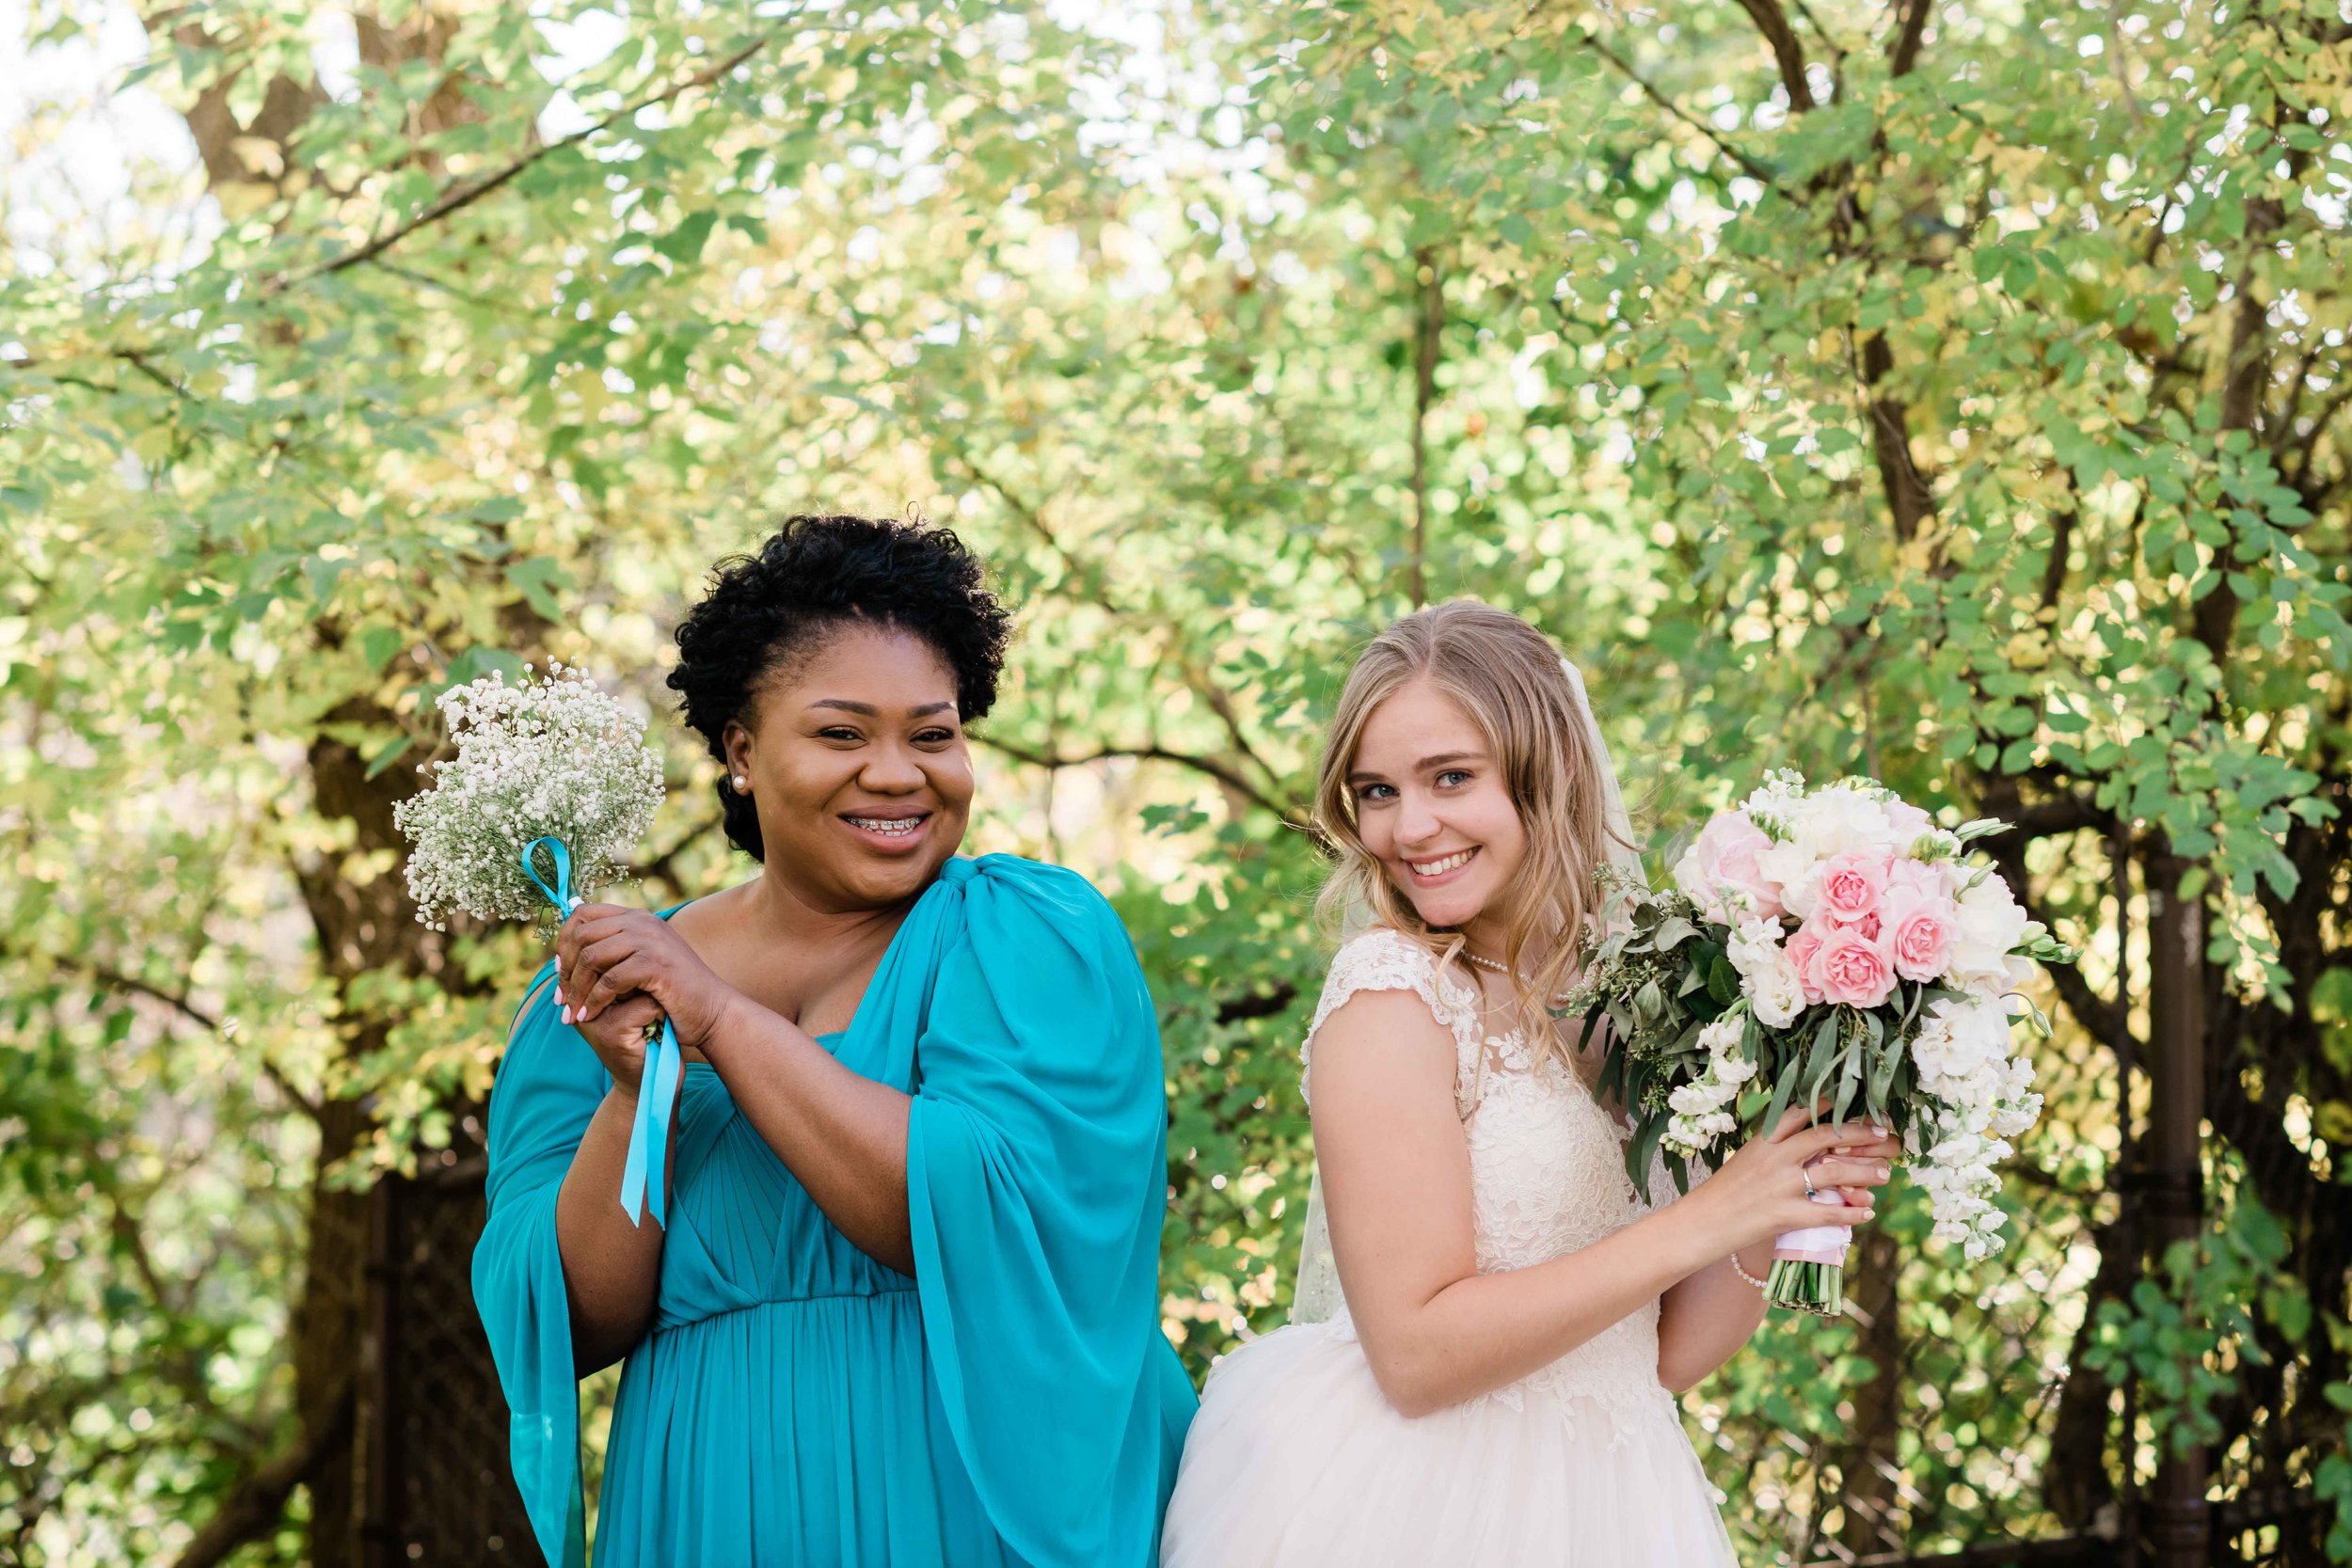 Bride and bridesmaid bump hips as they hold their bouquets